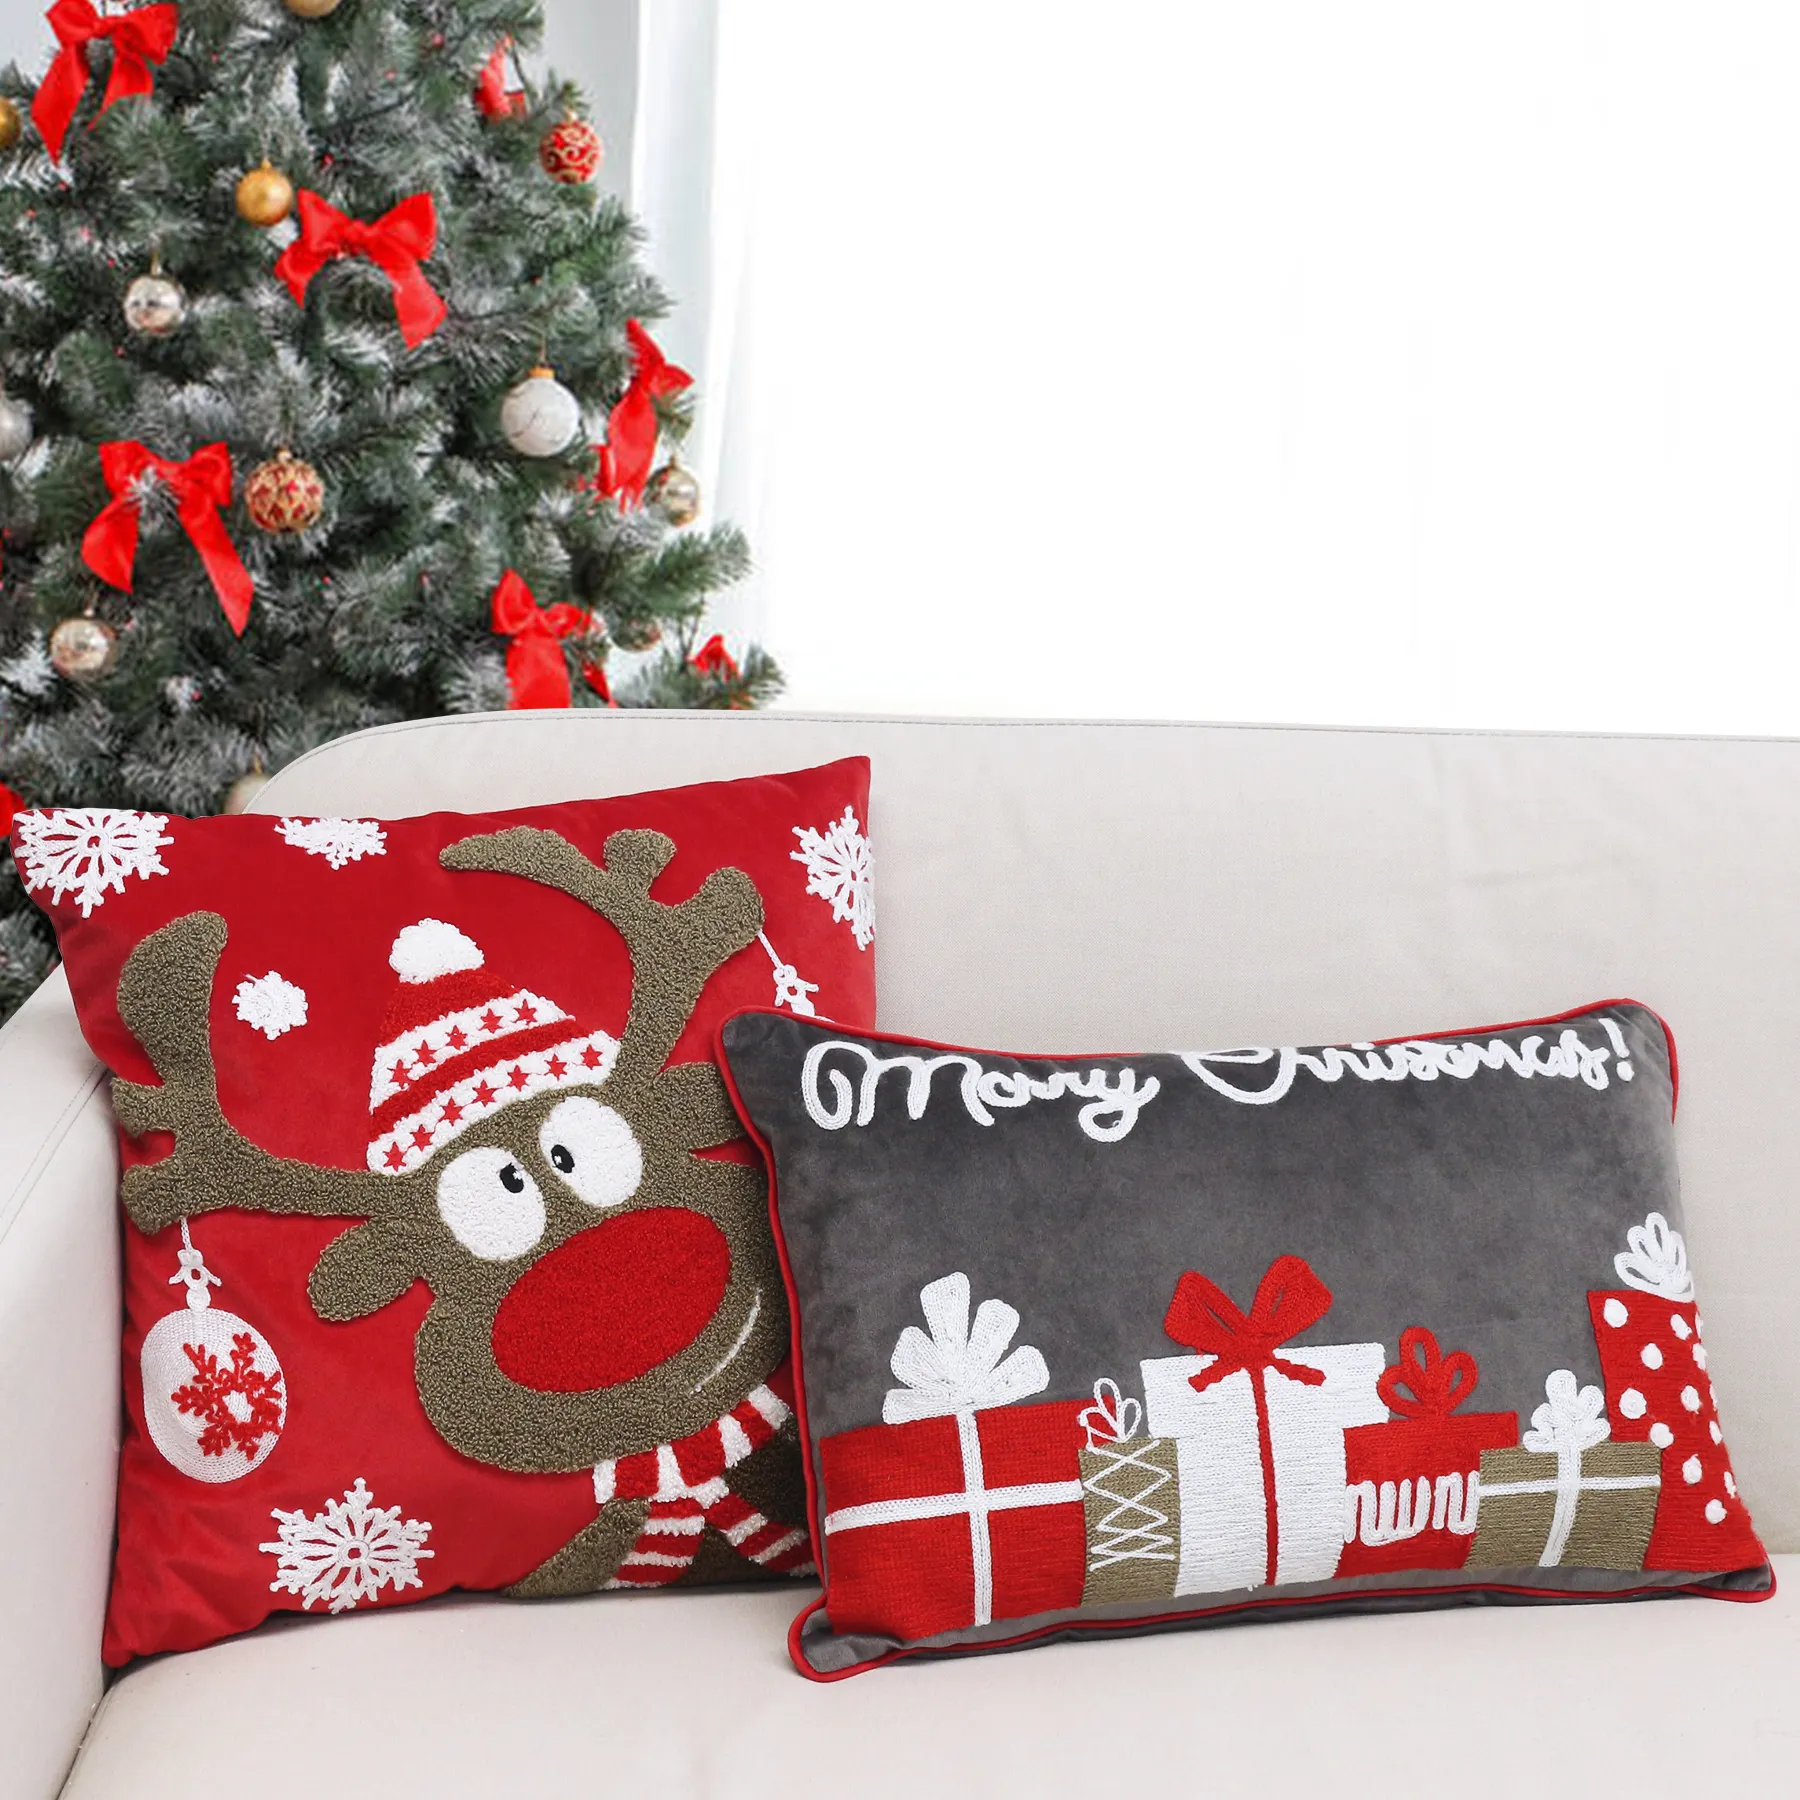 New In Merry Christmas Decorative Throw Pillow Cover winter Holiday Cushion Case Decoration for Sofa Couch Shaped pillow